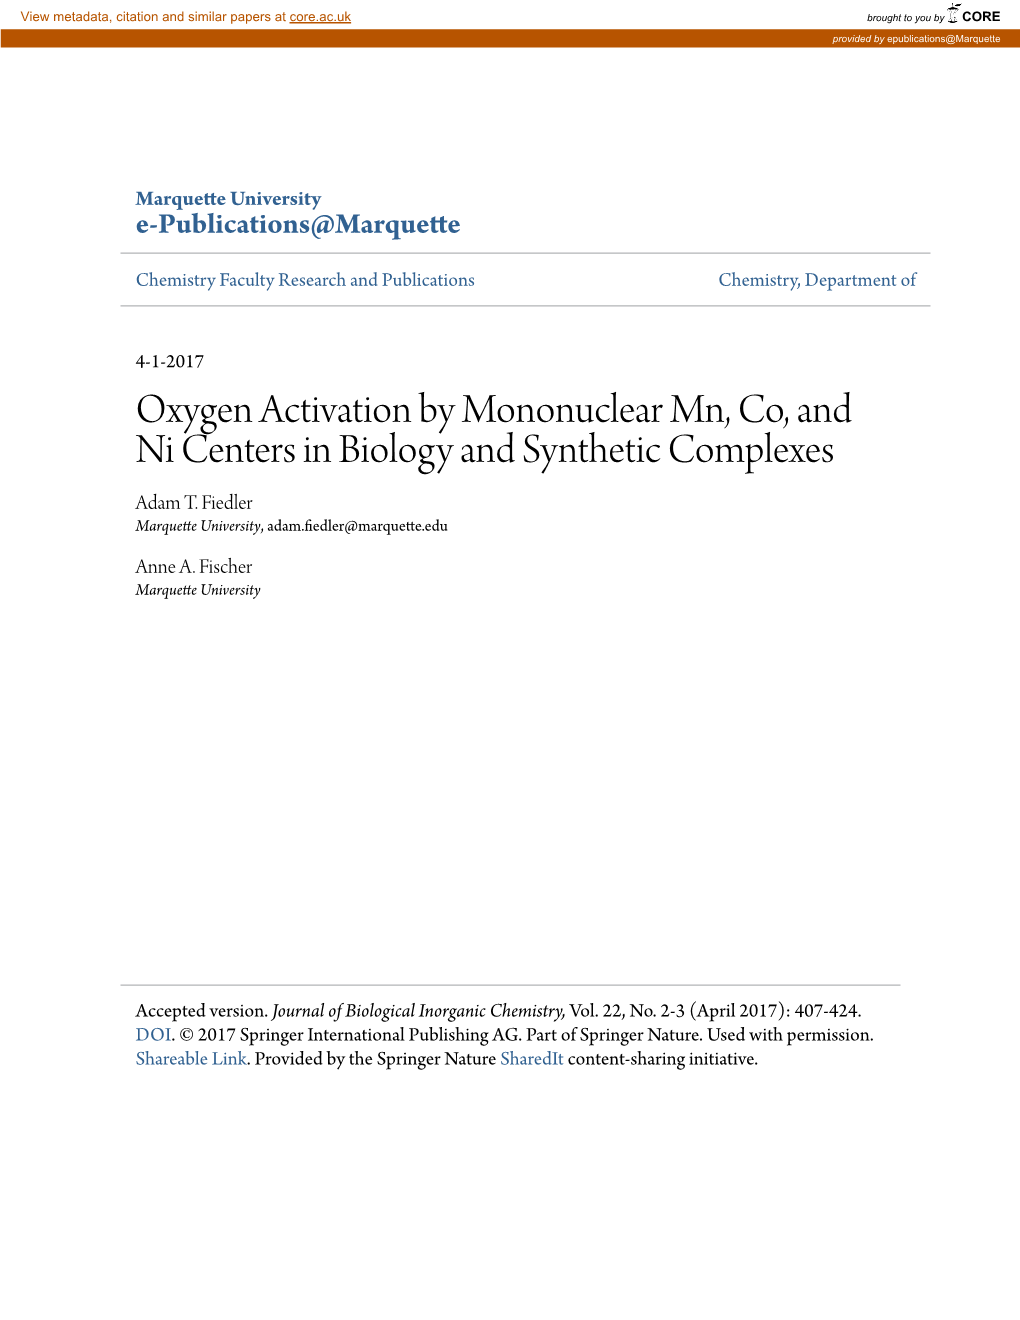 Oxygen Activation by Mononuclear Mn, Co, and Ni Centers in Biology and Synthetic Complexes Adam T